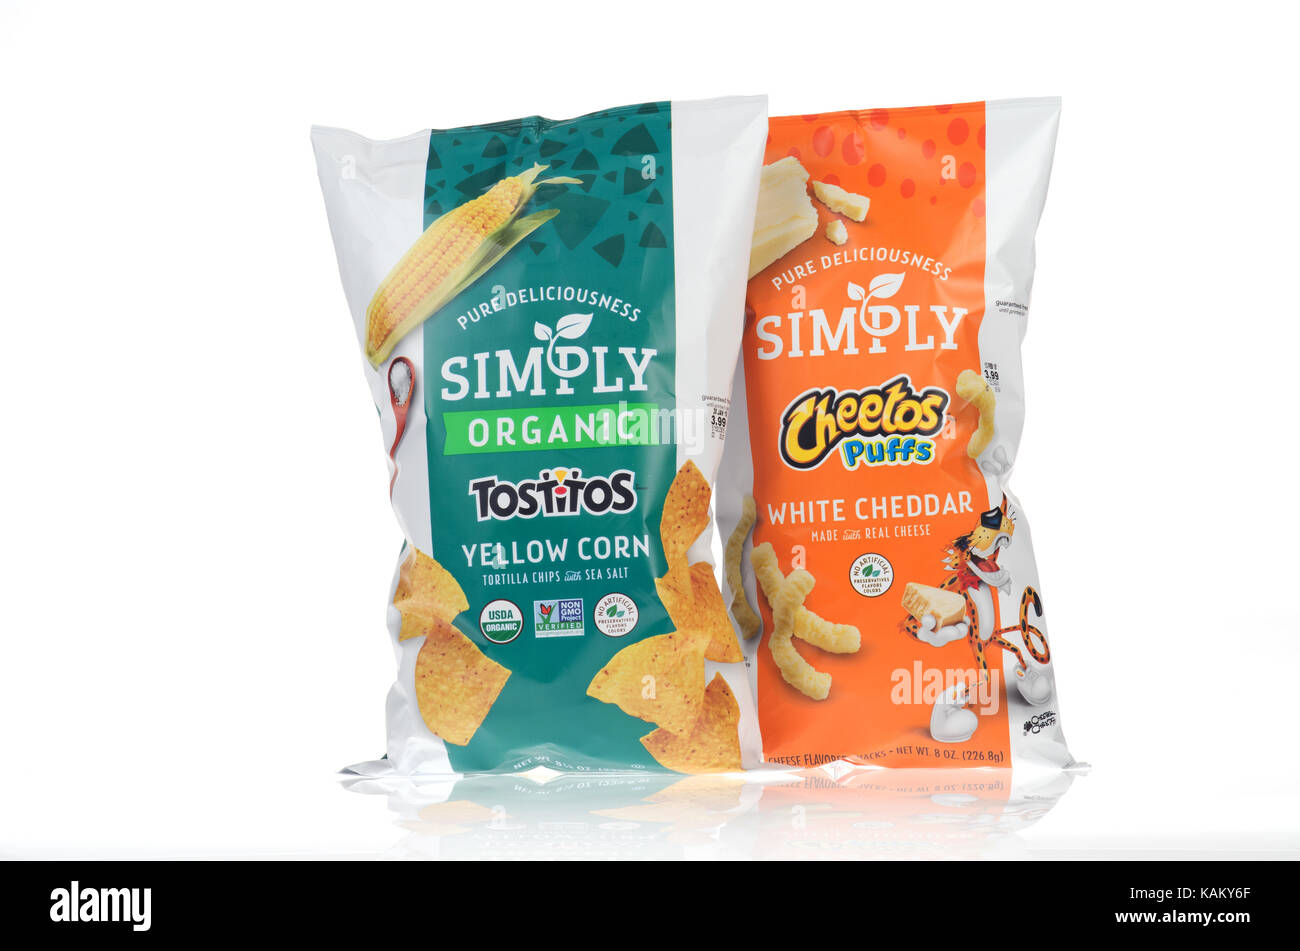 Bags of Frito-Lay Simply Organic Tostitos corn chips with Simply Cheetos Puffs Stock Photo